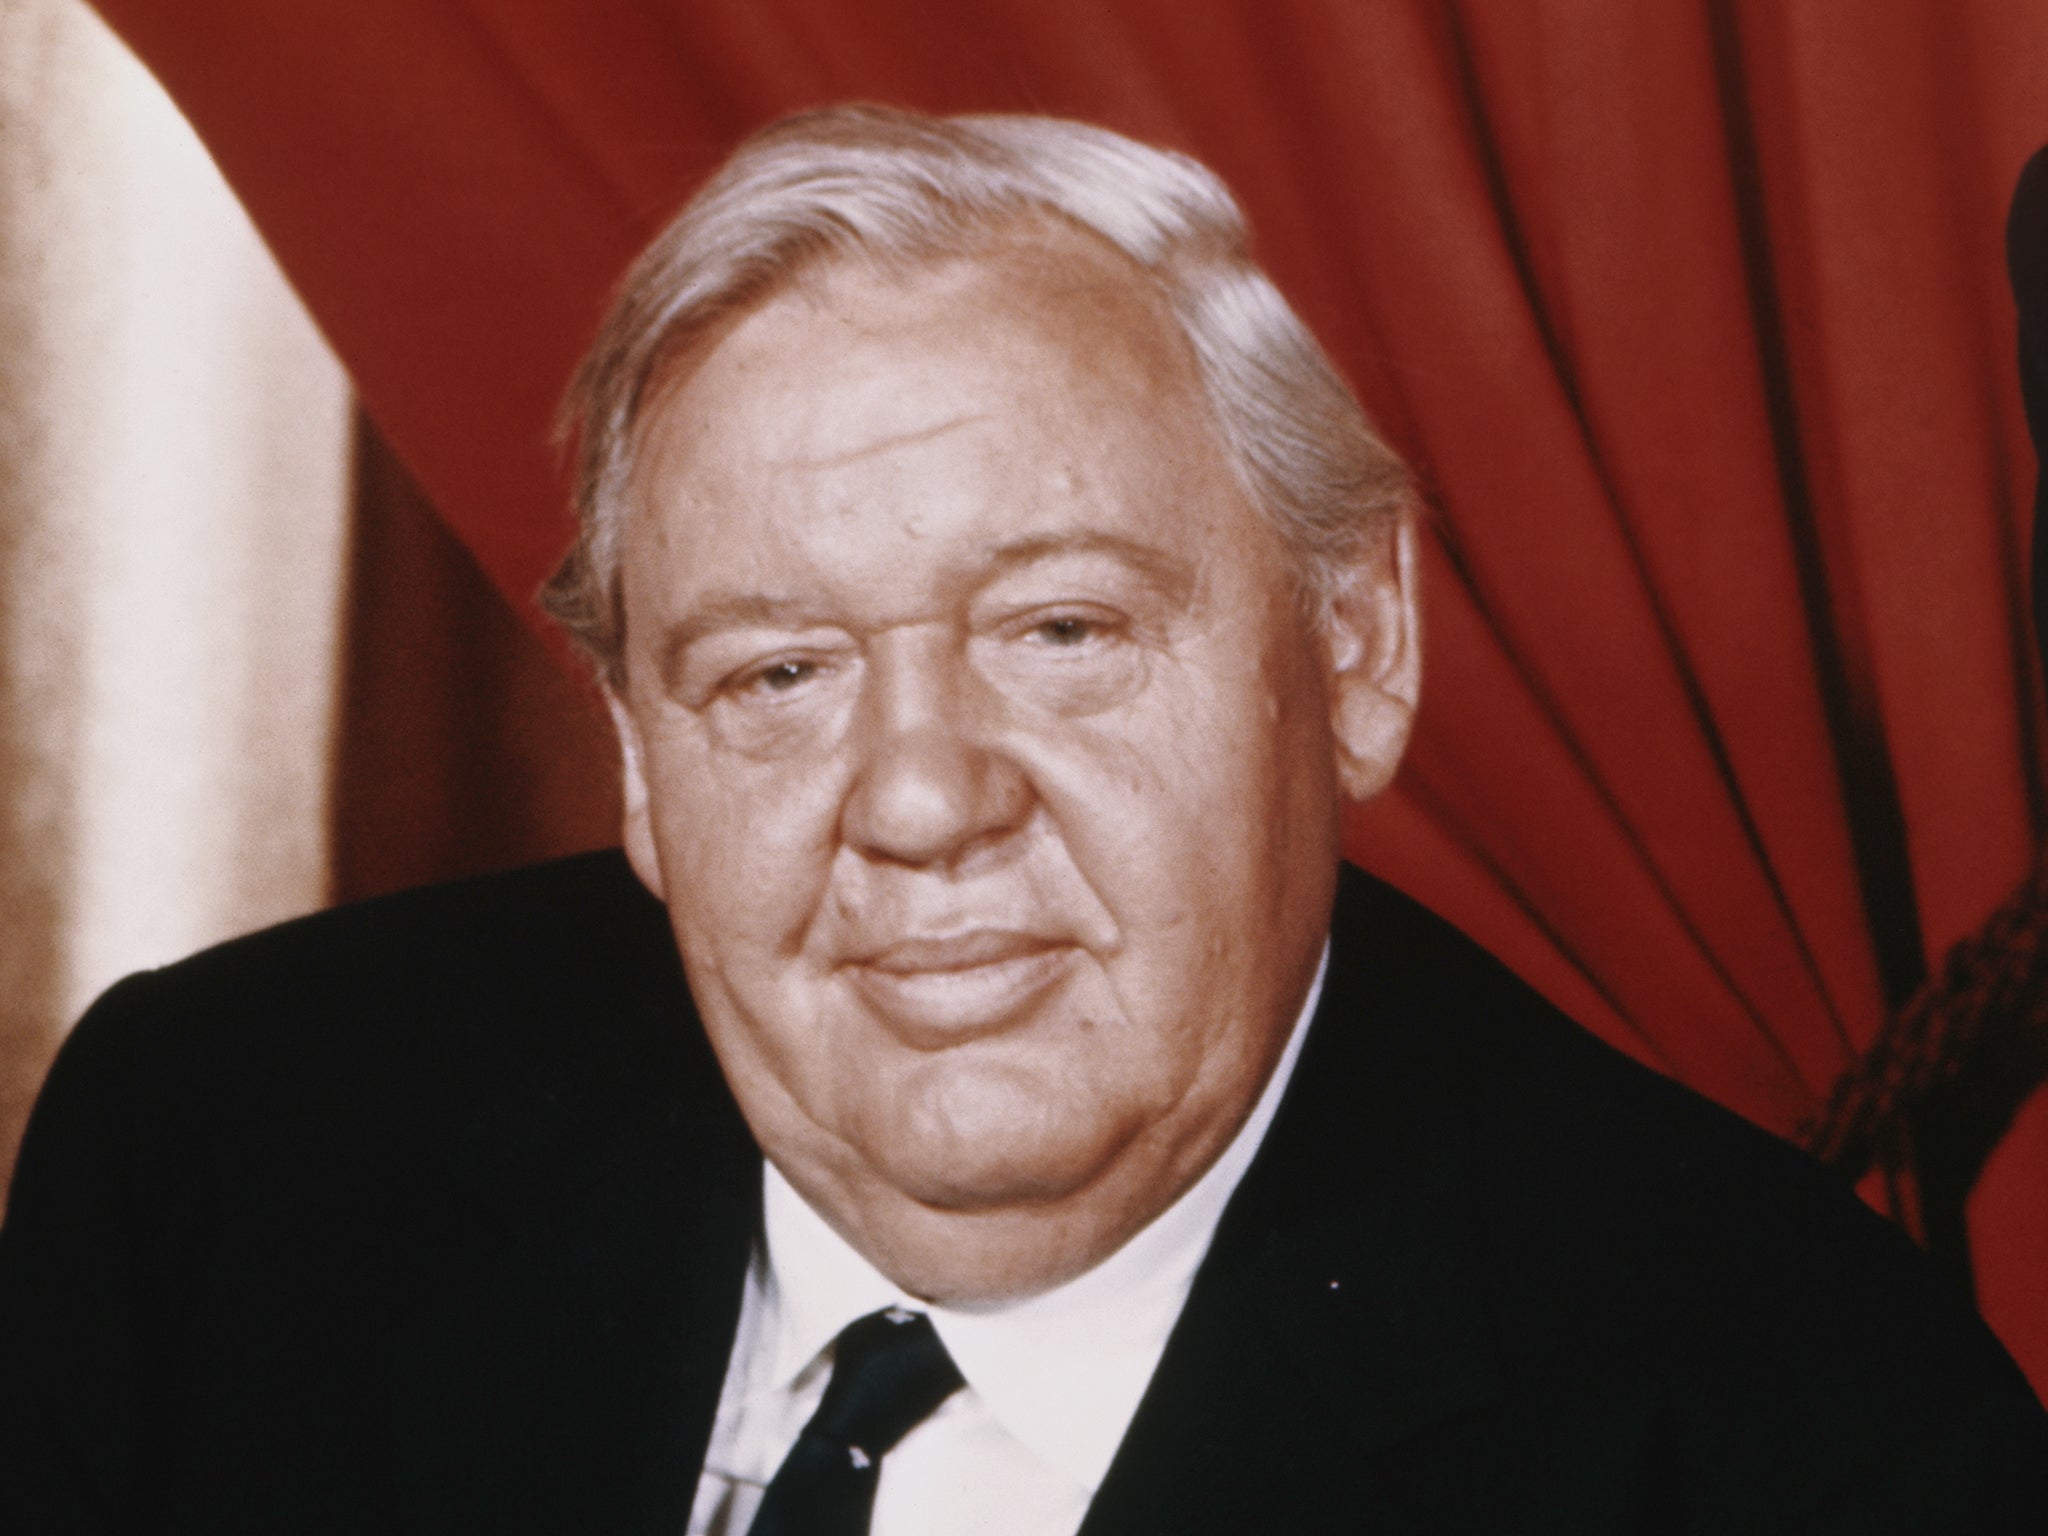 Which historical drama starring Charles Laughton was the first non-Hollywood film to win an Oscar?